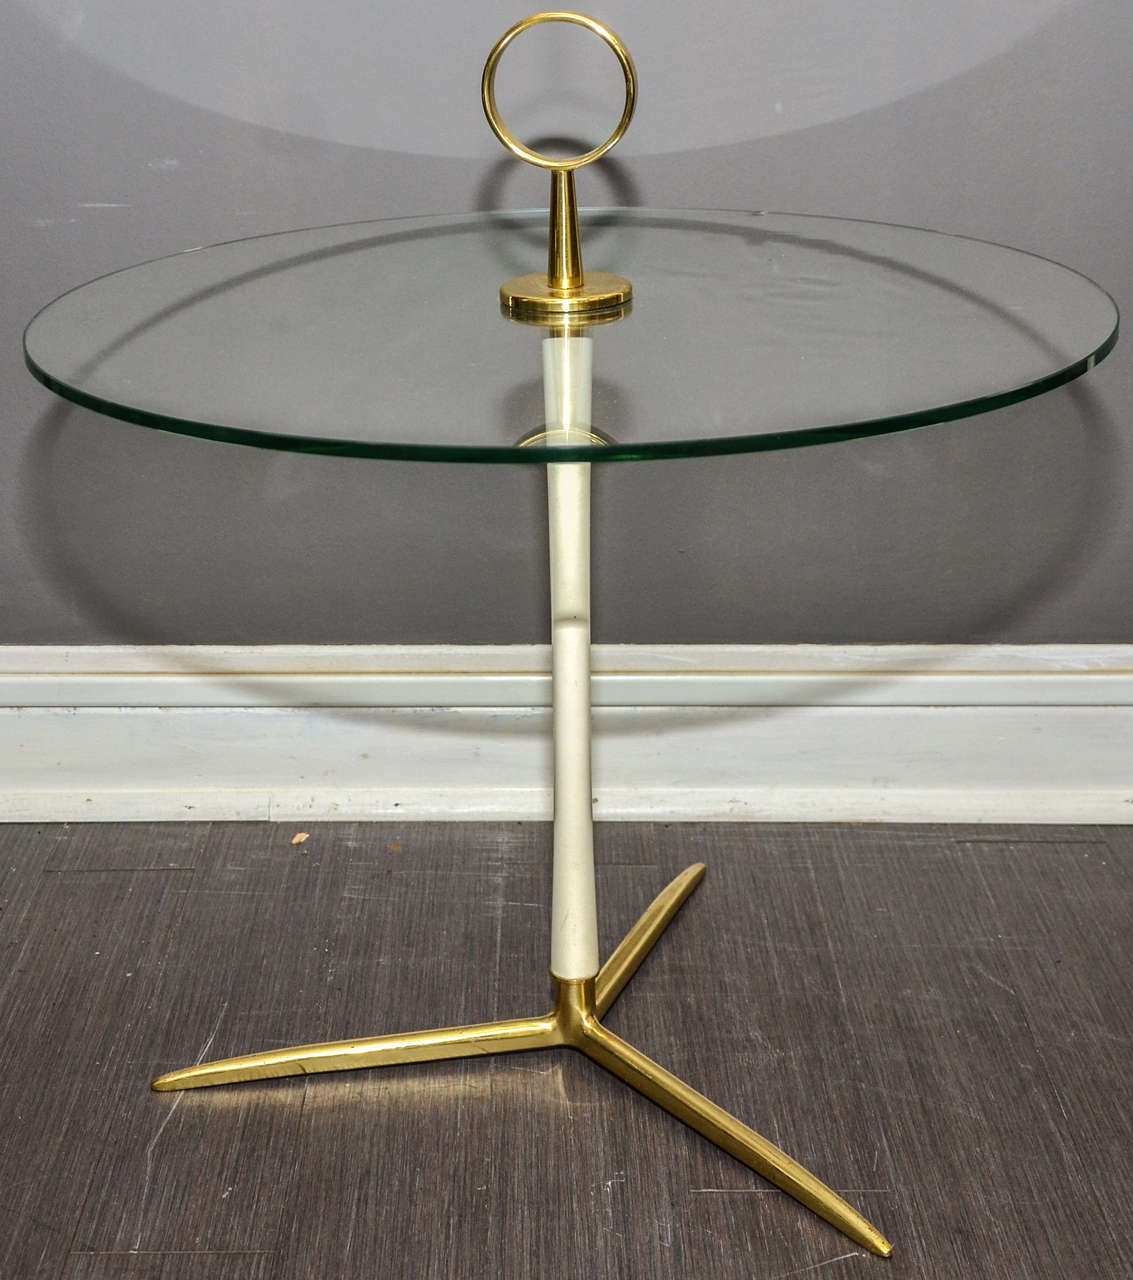 1950s Italian gueridon in gilded broze with central shaft in white patina; circular top surface. One damaged area (see view 9) on edge of glass that can be restored upon request without additional charge.